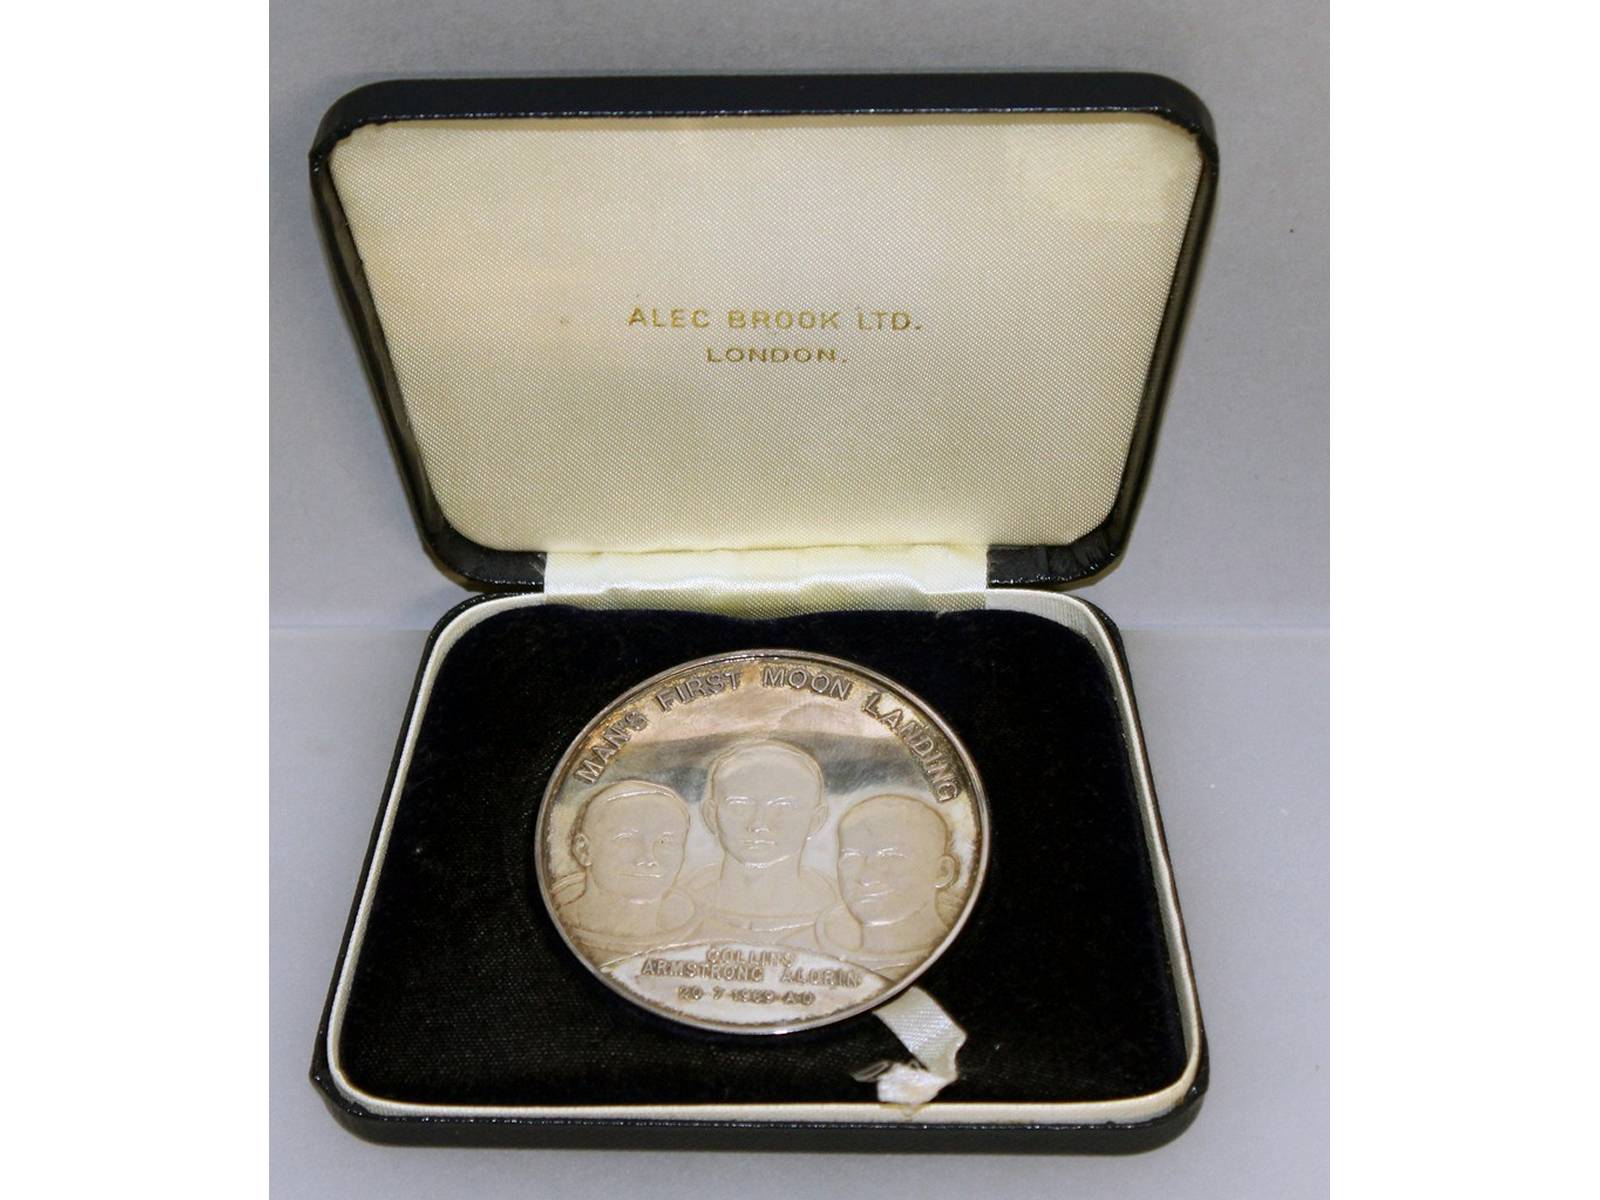 A silver medallion "Mans First Landing on the Moon", No. 2363, in a case.